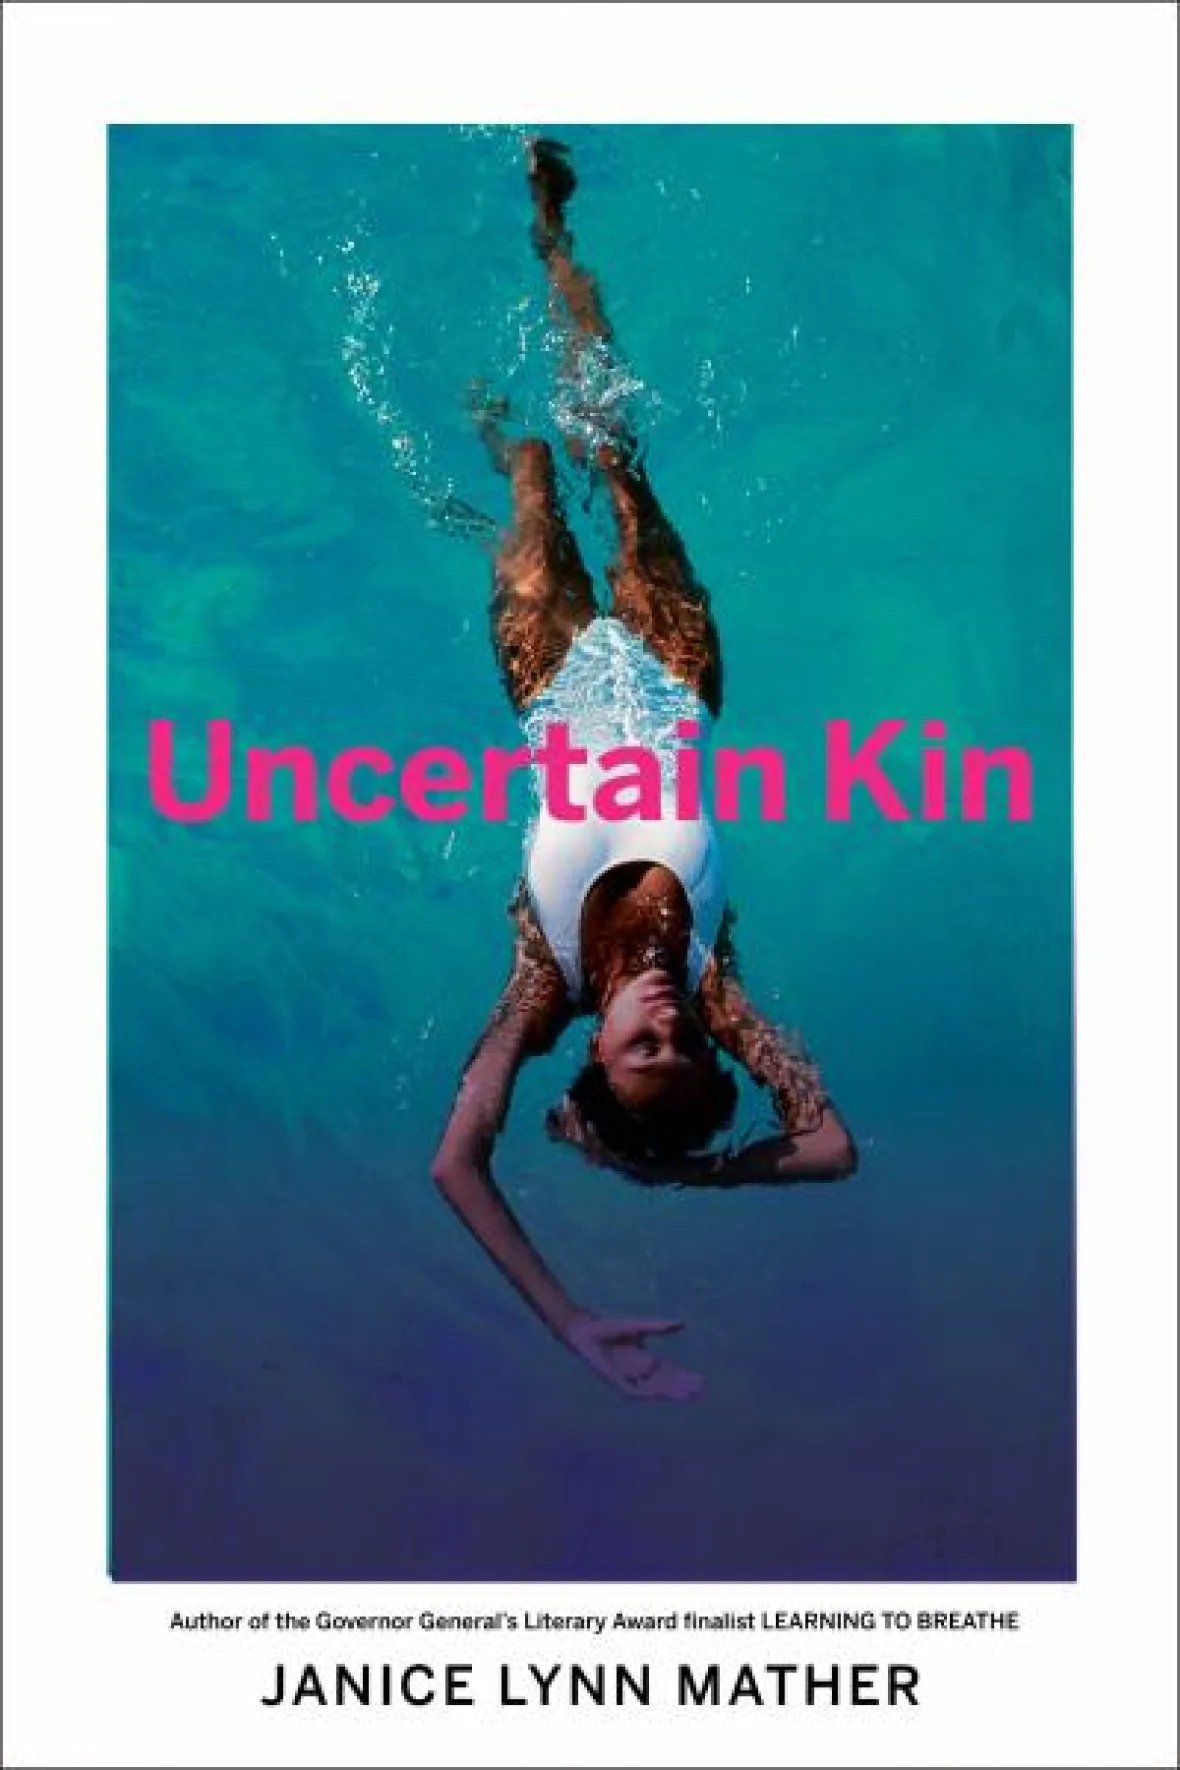 The book cover of Uncertain Kin by Janice Lynn Mather